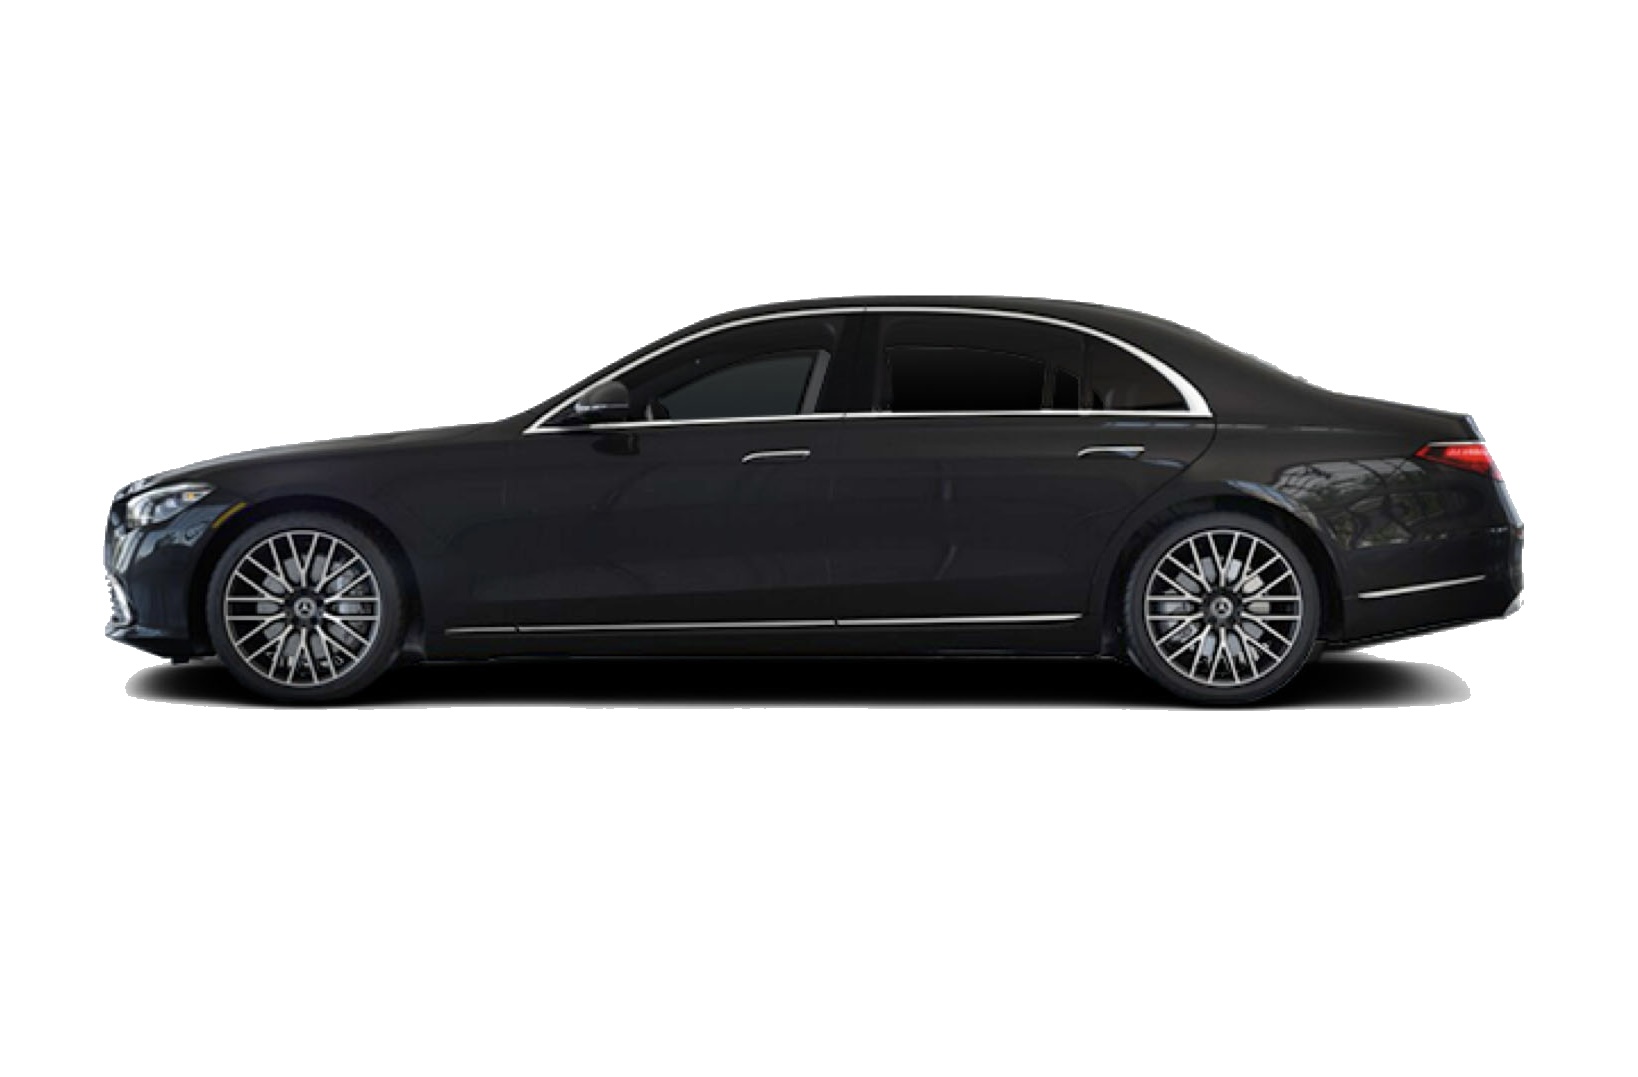 First Class Limousine in our chauffeur service - Our Exclusives Fleets